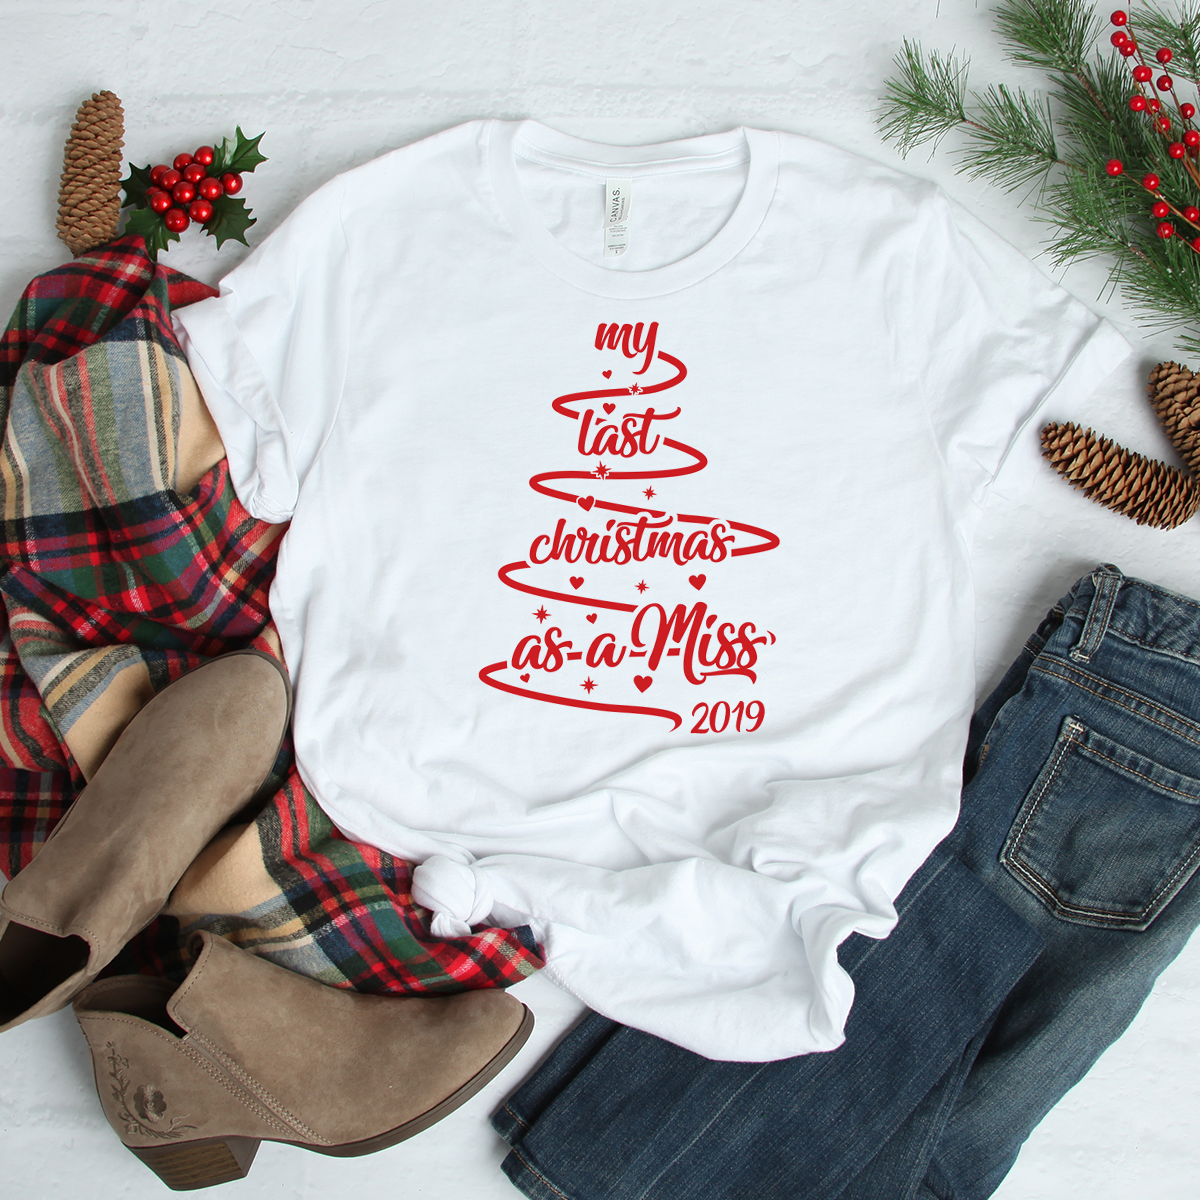 SALE - Last Christmas as a Miss 2019 white t-shirt